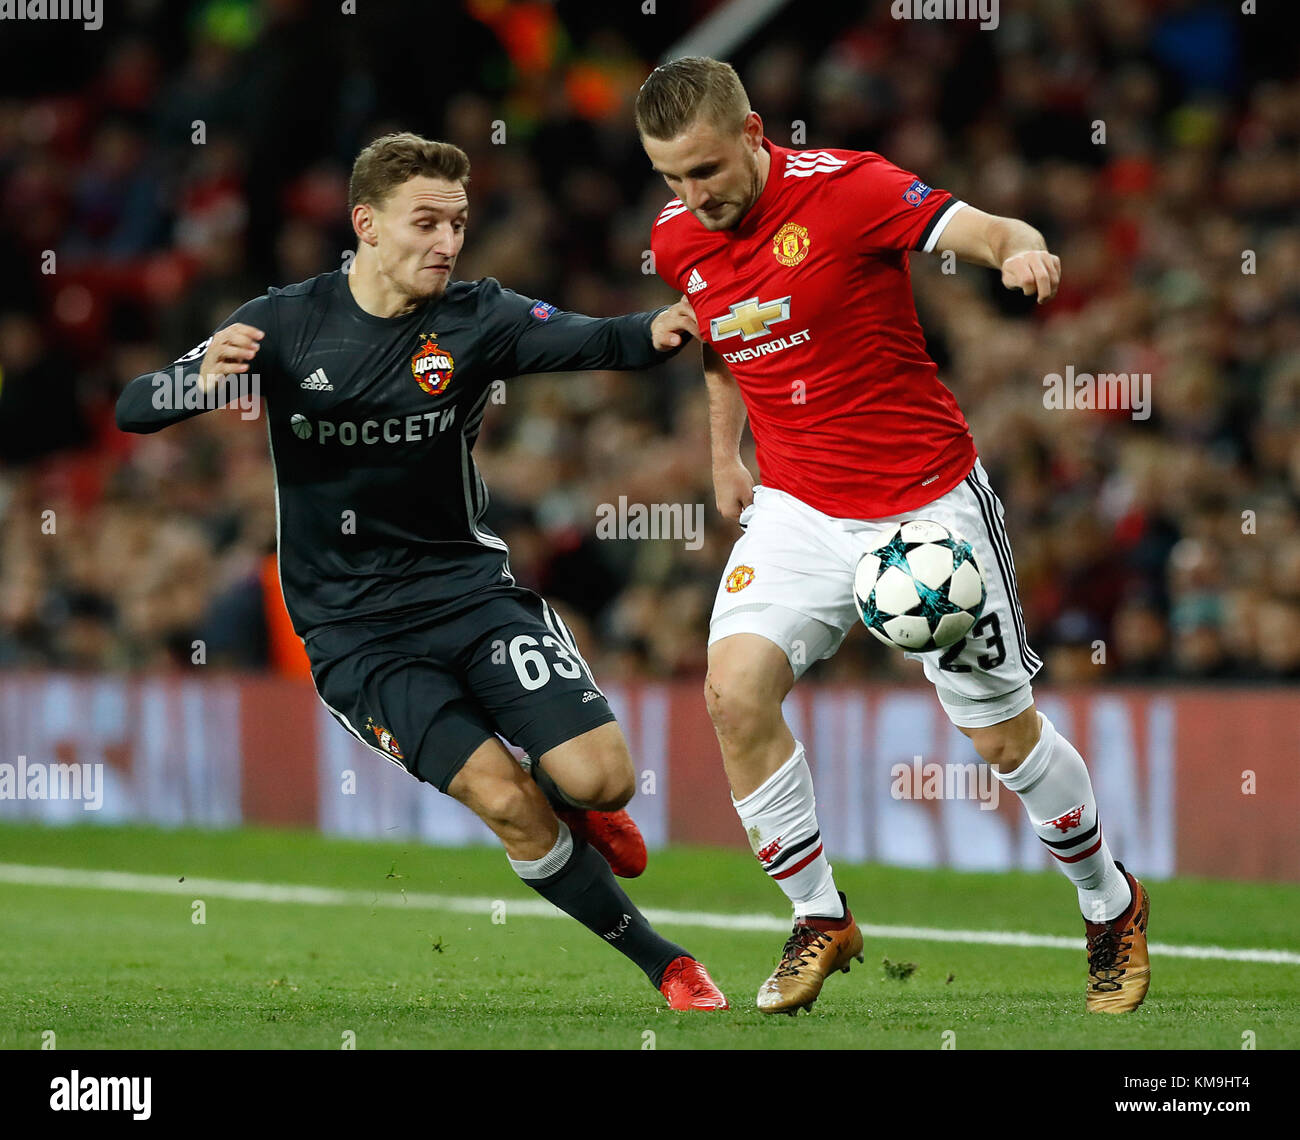 CSKA Moscow's Fedor Chalov (left) and Manchester United's Luke Shaw in action during the UEFA Champions League match at Old Trafford, Manchester. Stock Photo